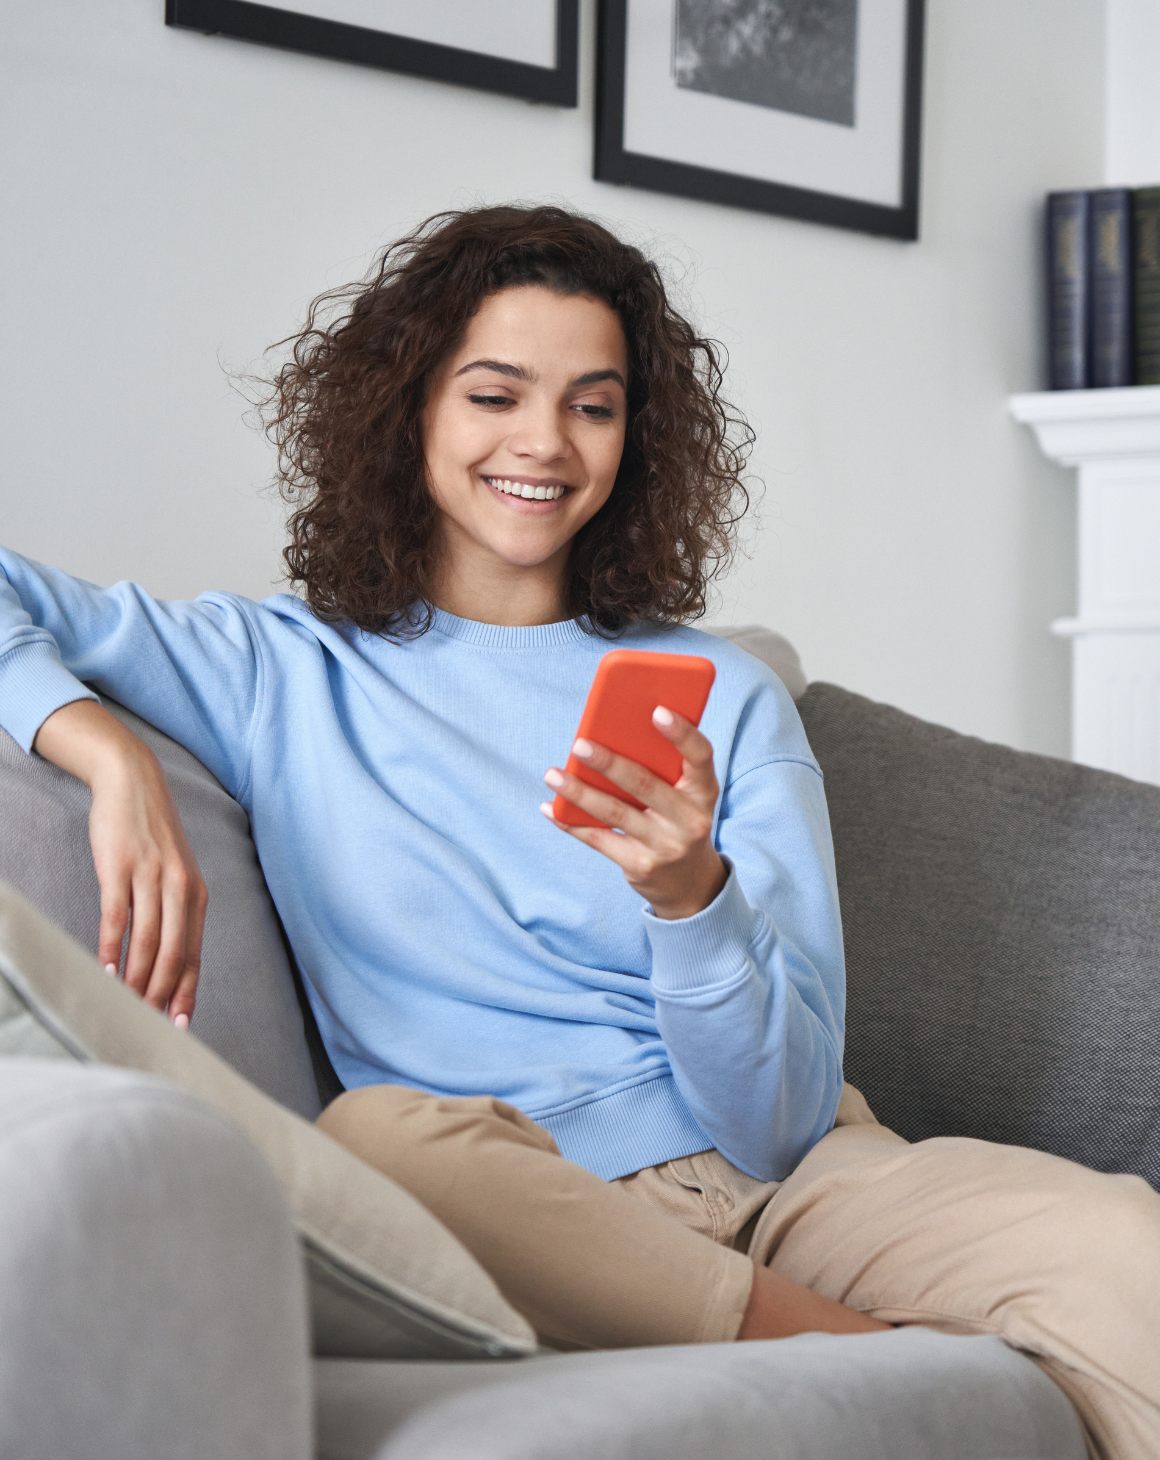 woman smiling, holding phone, sitting on couch